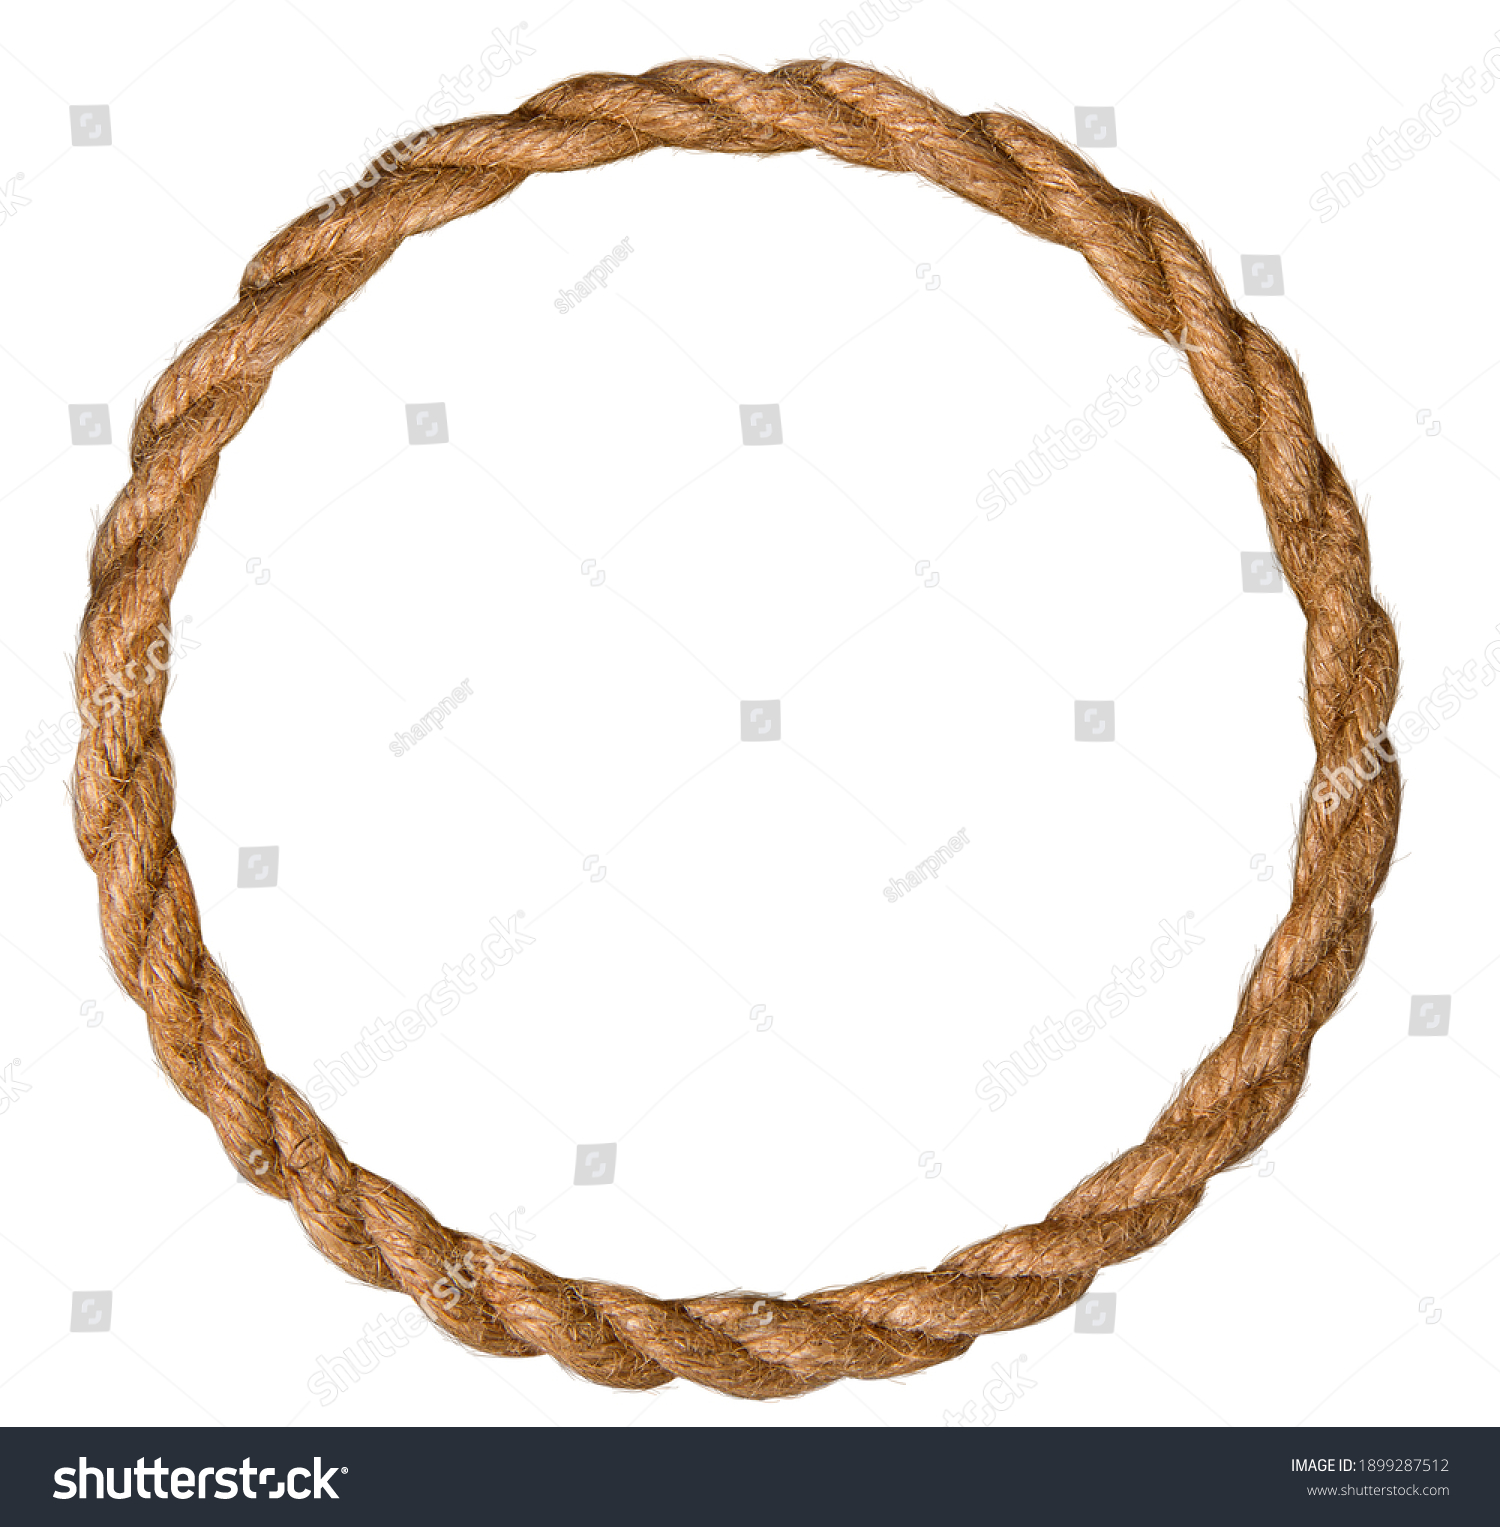 frame made of natural rough rope rolled into an endless ring on a white background #1899287512